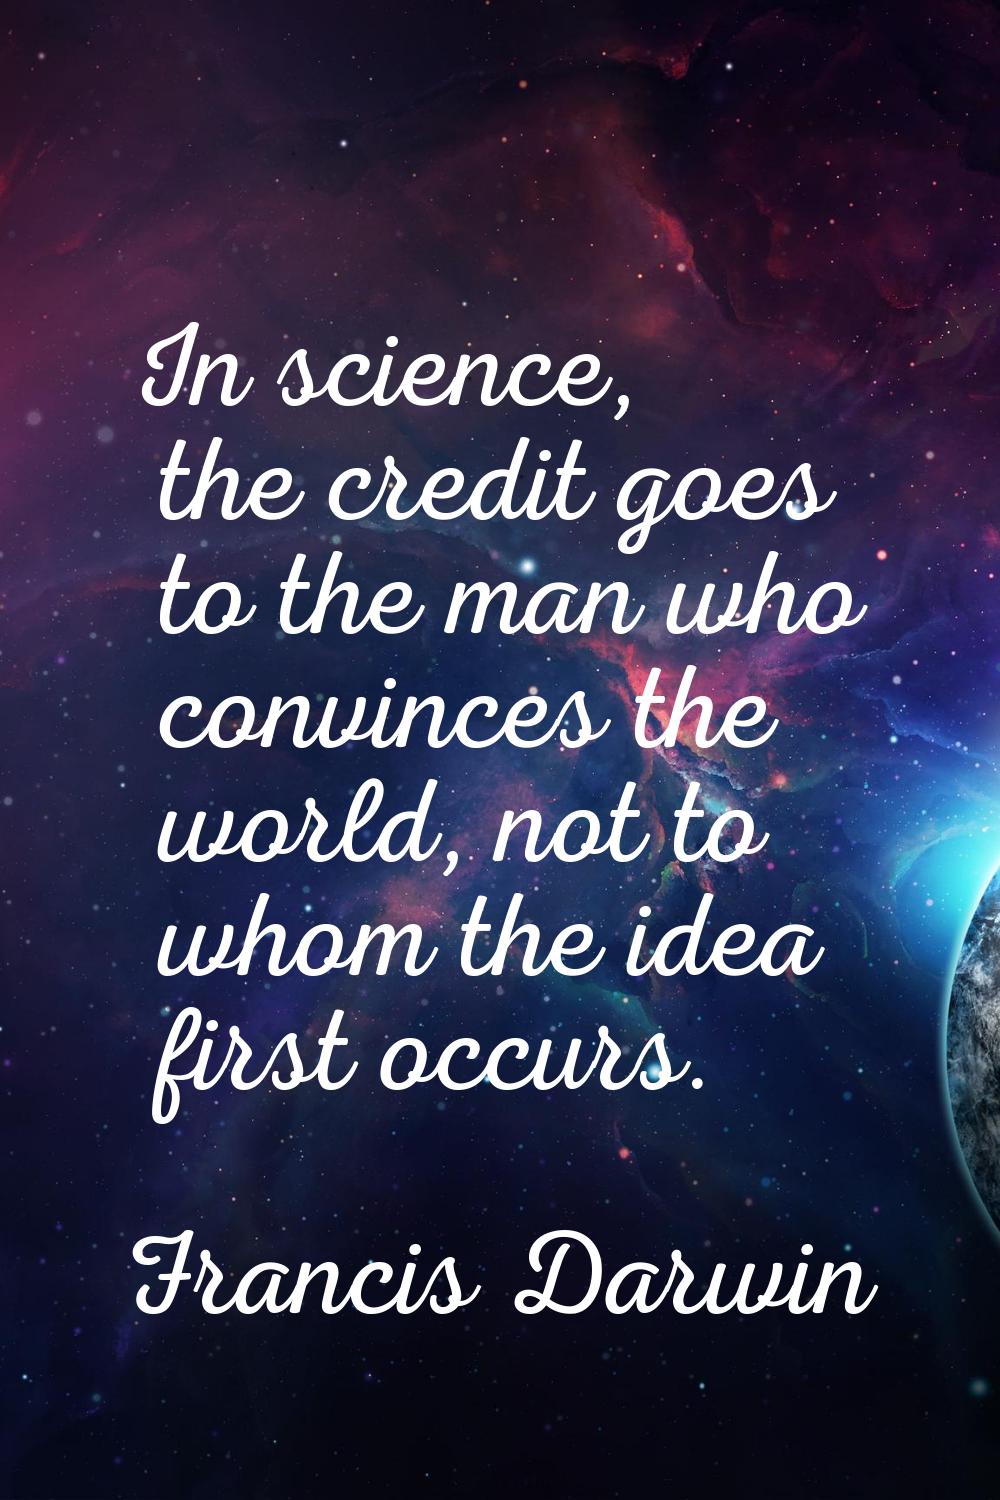 In science, the credit goes to the man who convinces the world, not to whom the idea first occurs.